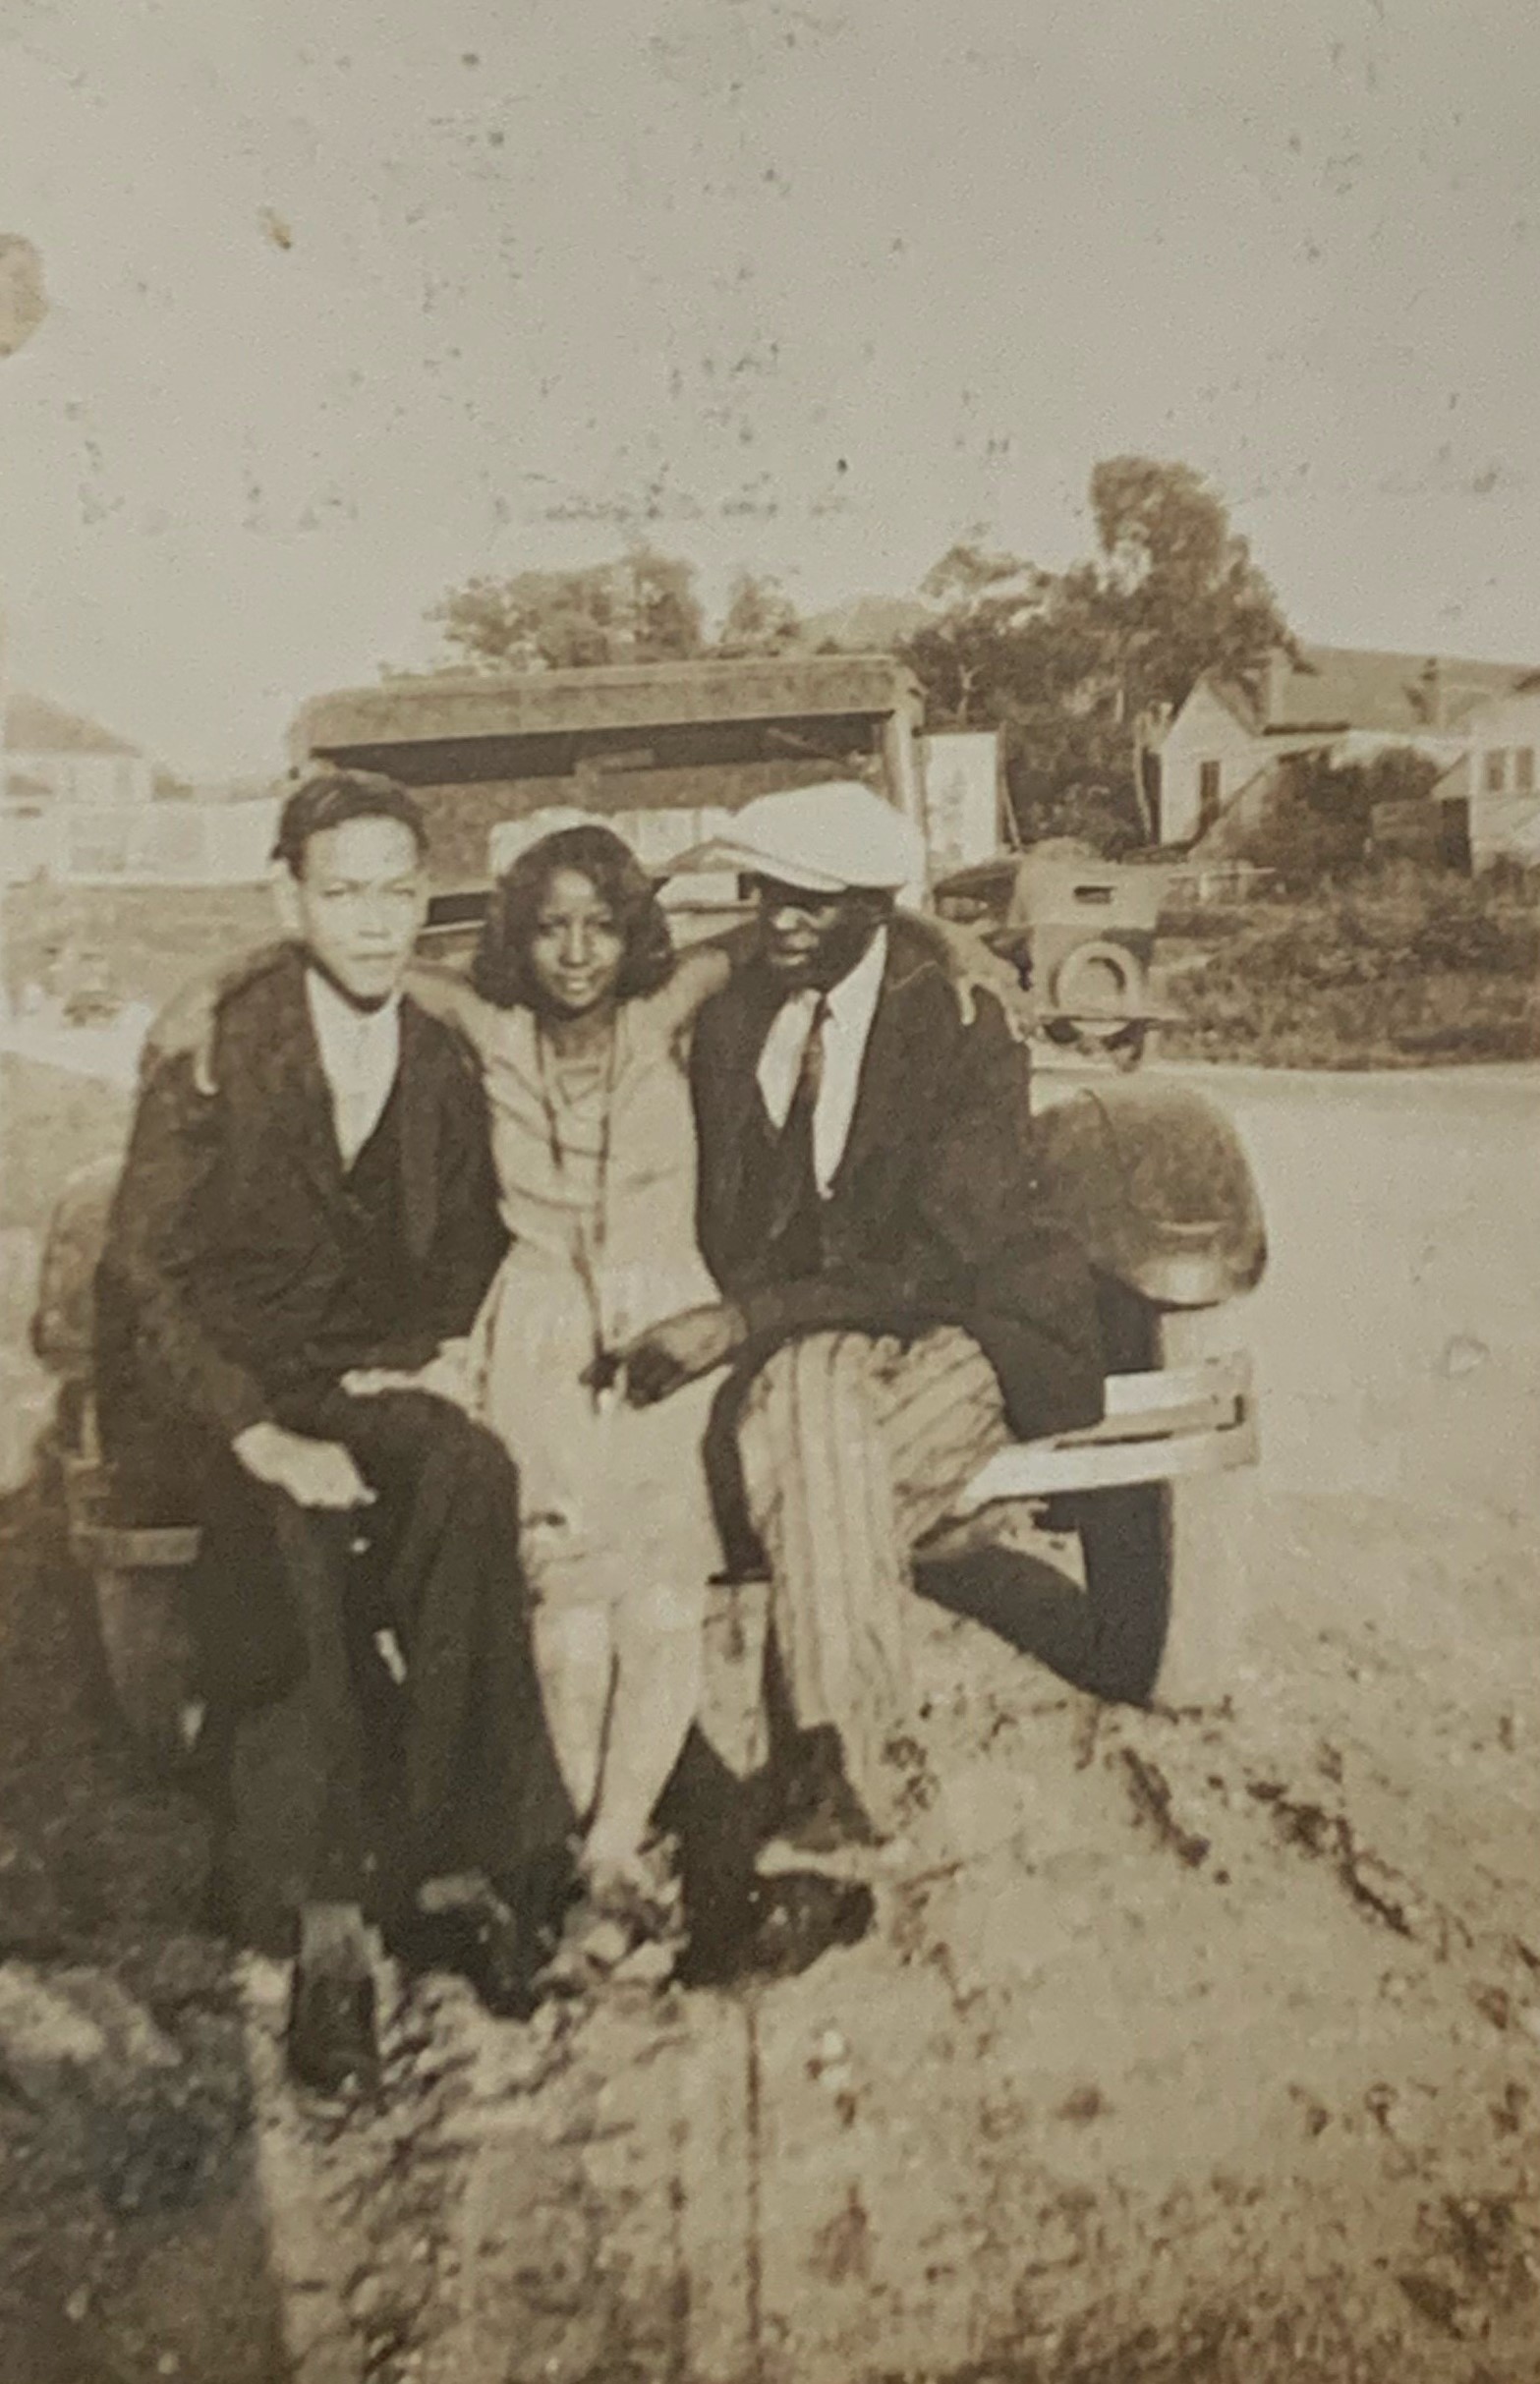 Two men and a woman pose on an automobile